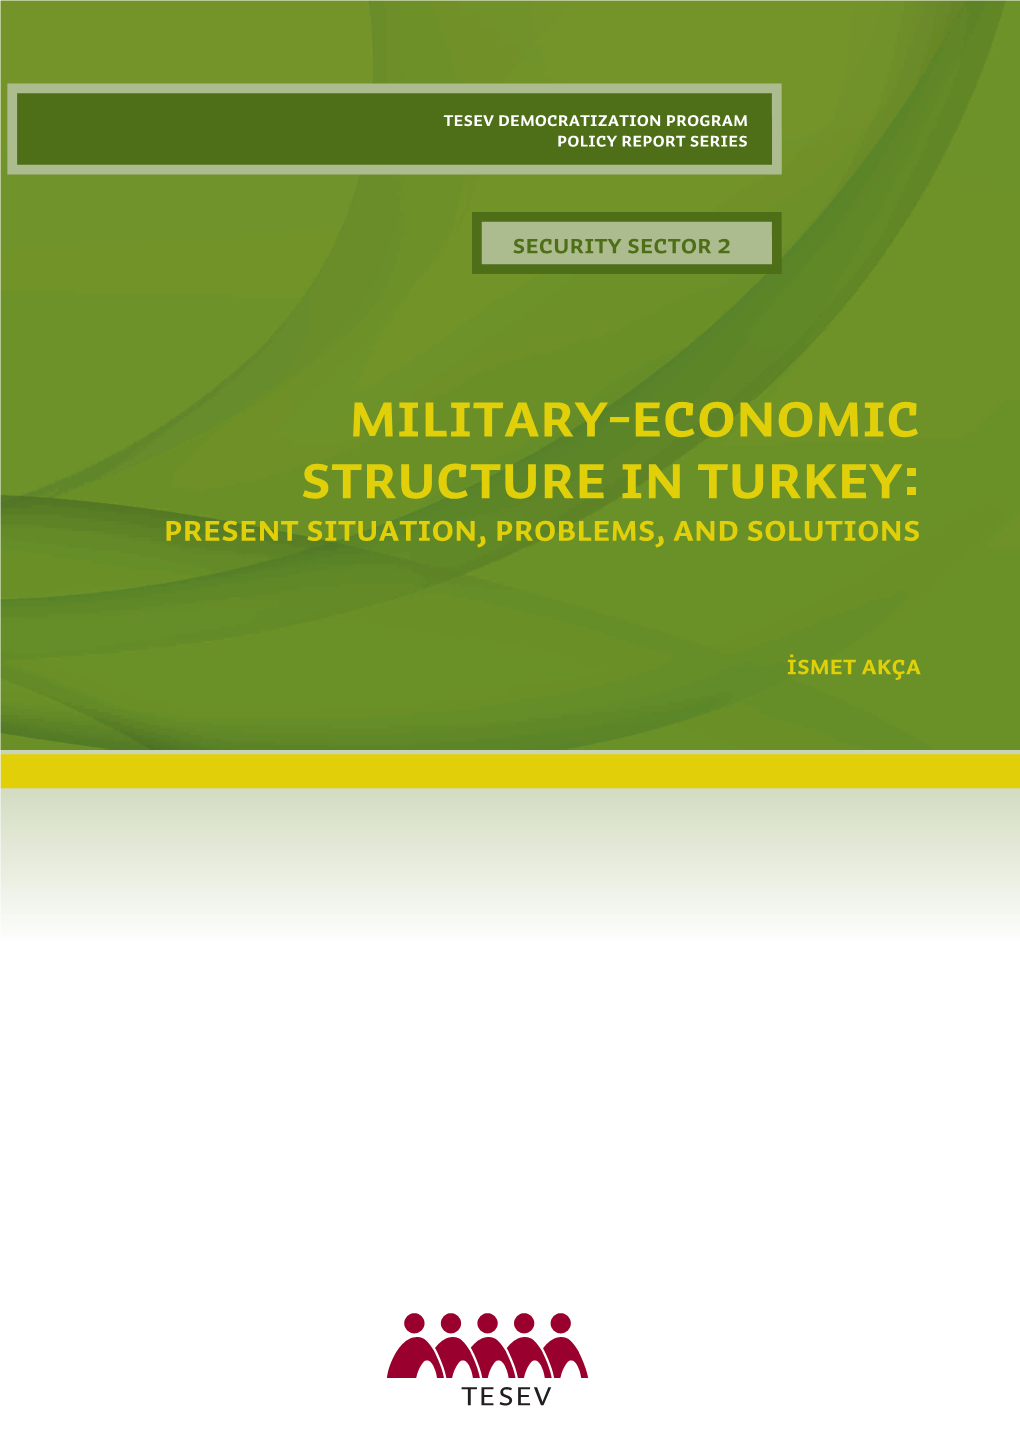 Military-Economic Structure in Turkey: Present Situation, Problems, and Solutions